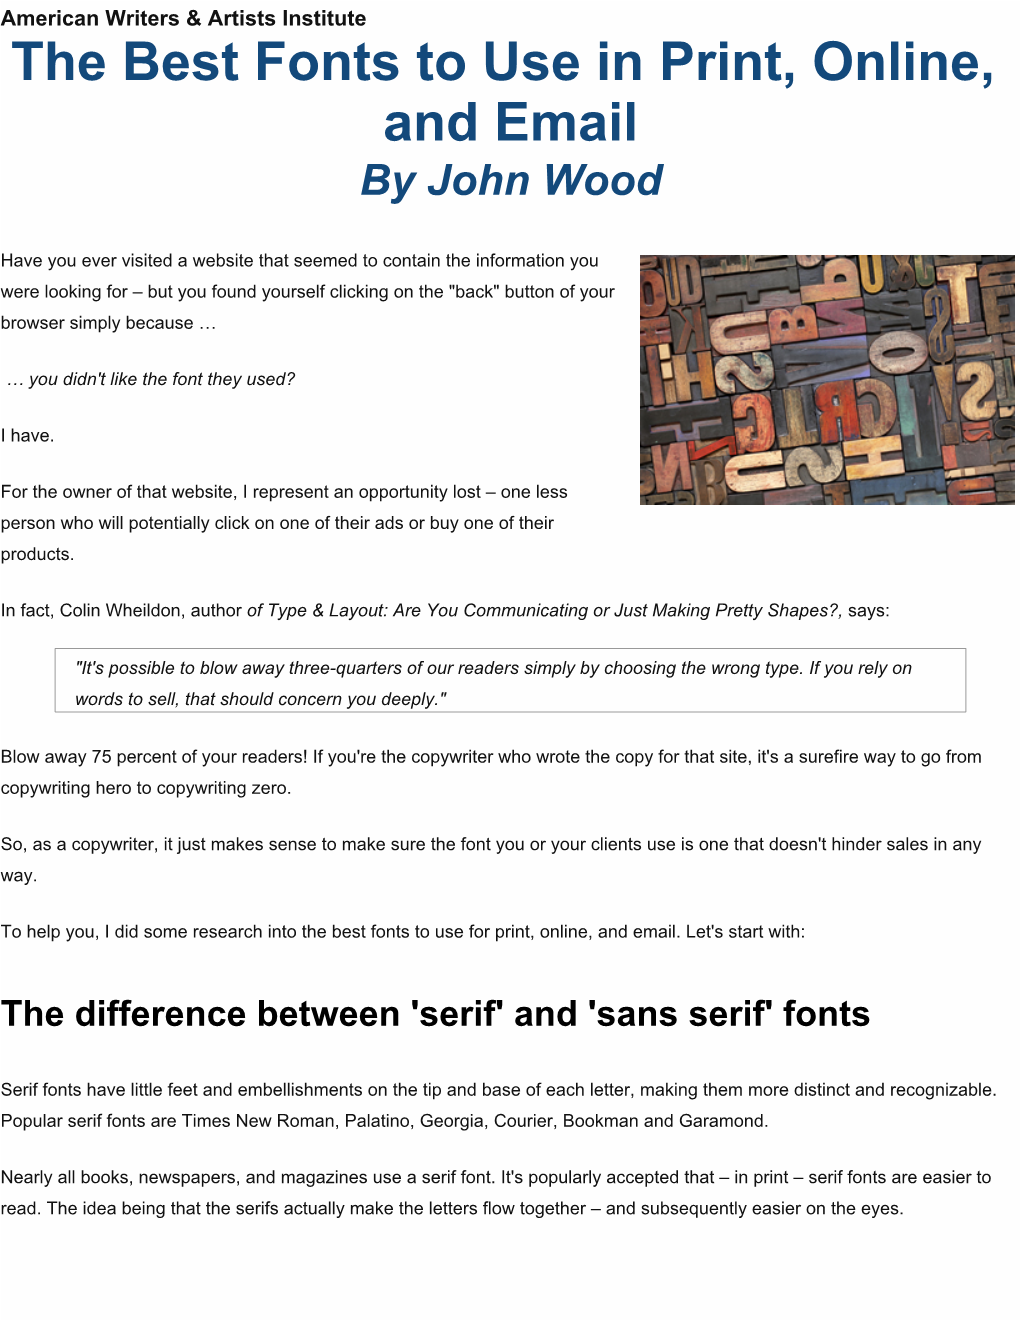 The Best Fonts to Use in Print, Online, and Email by John Wood